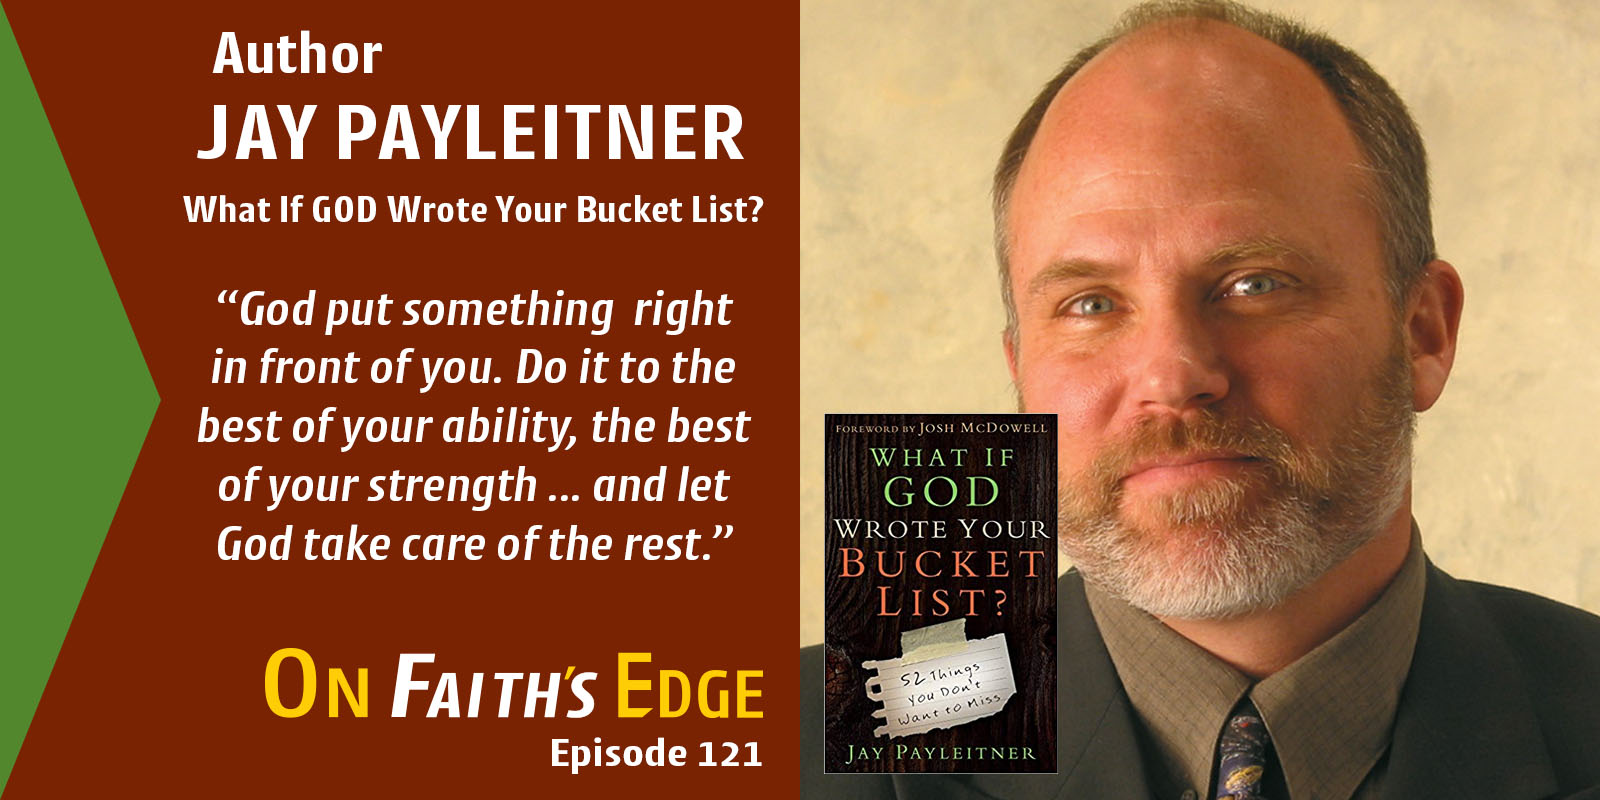 What If God Wrote Your Bucket List? | Author Jay Payleitner